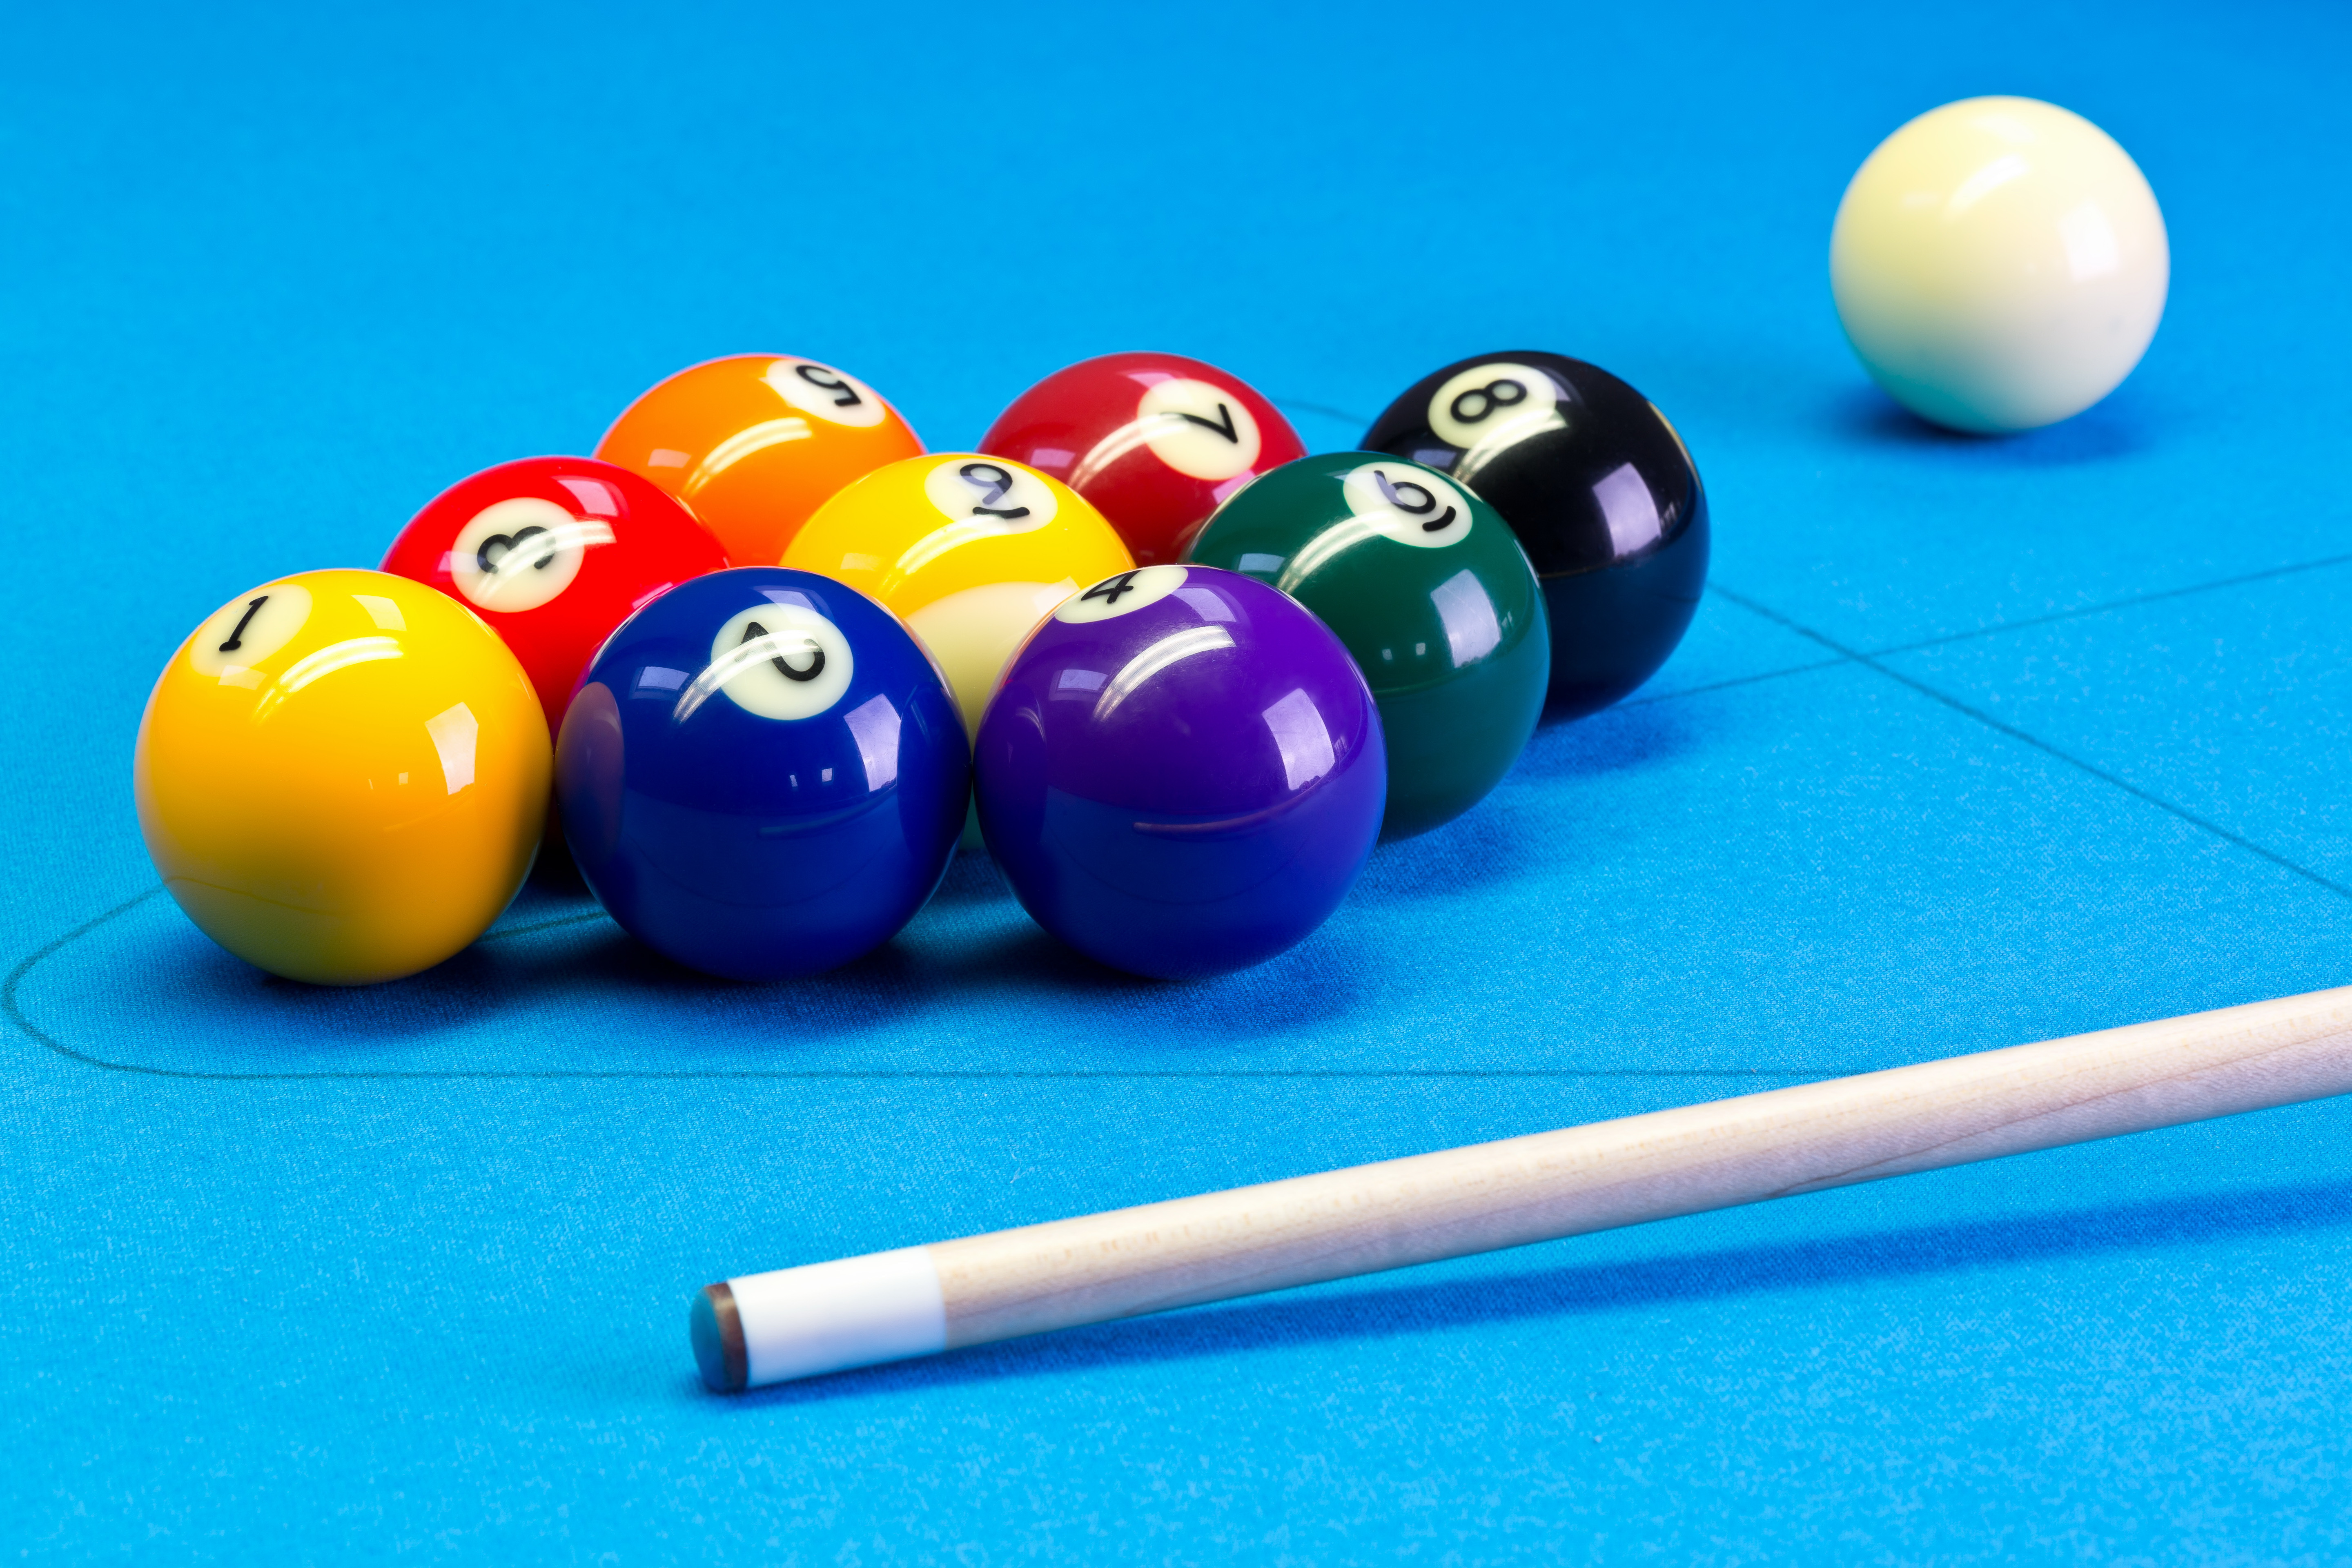 Billiard pool game nine ball with nineball balls set up with cue on billiard table with blue cloth